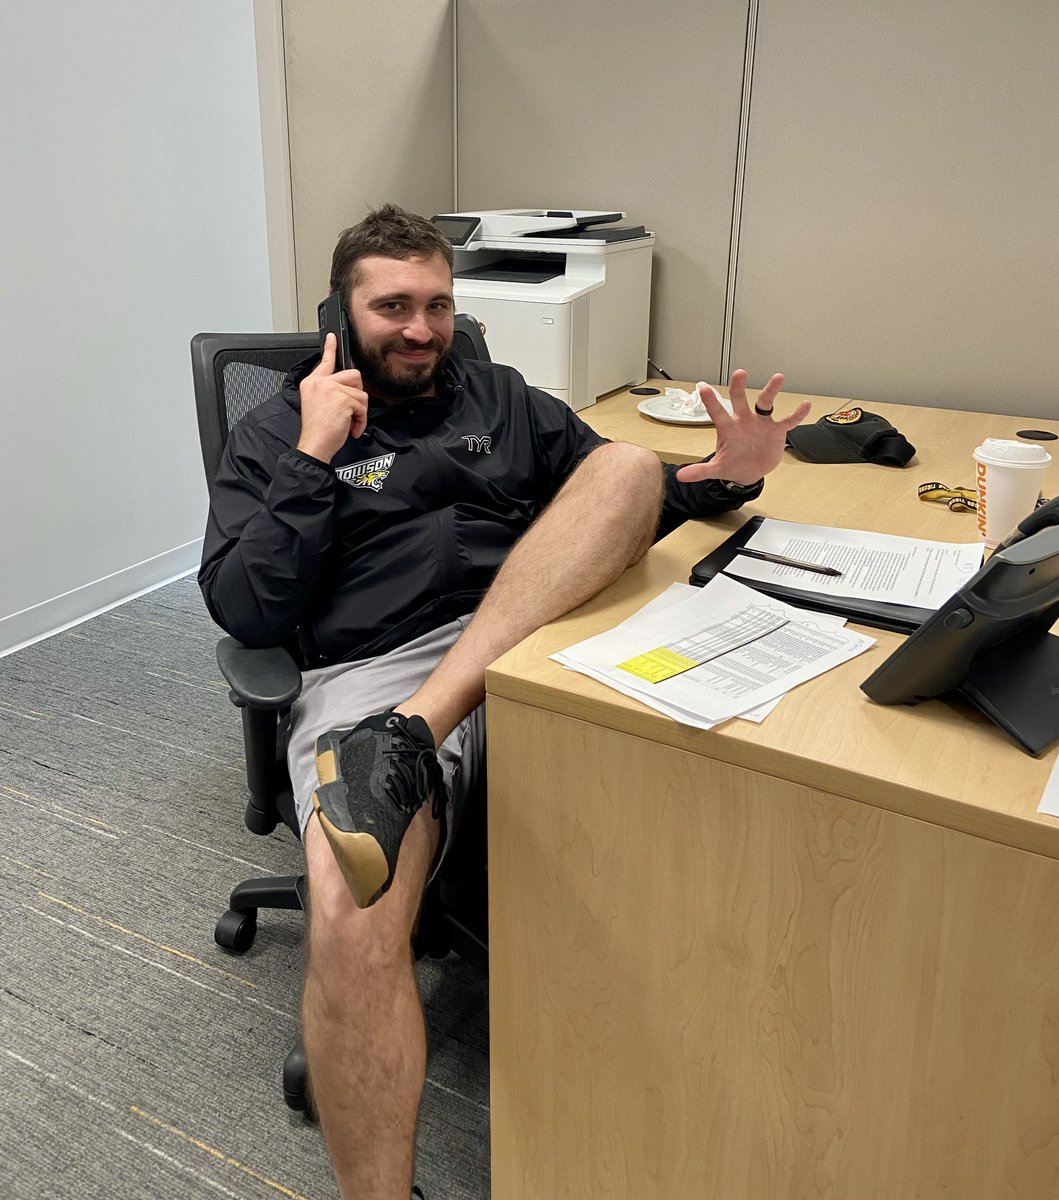 @Towson_SWIMDIVE Head Coach Tony Bruno has made his way up and is dialing for dollars! Be sure to pick up and help support his program. Visit give.towson.edu to donate. #GohTigers